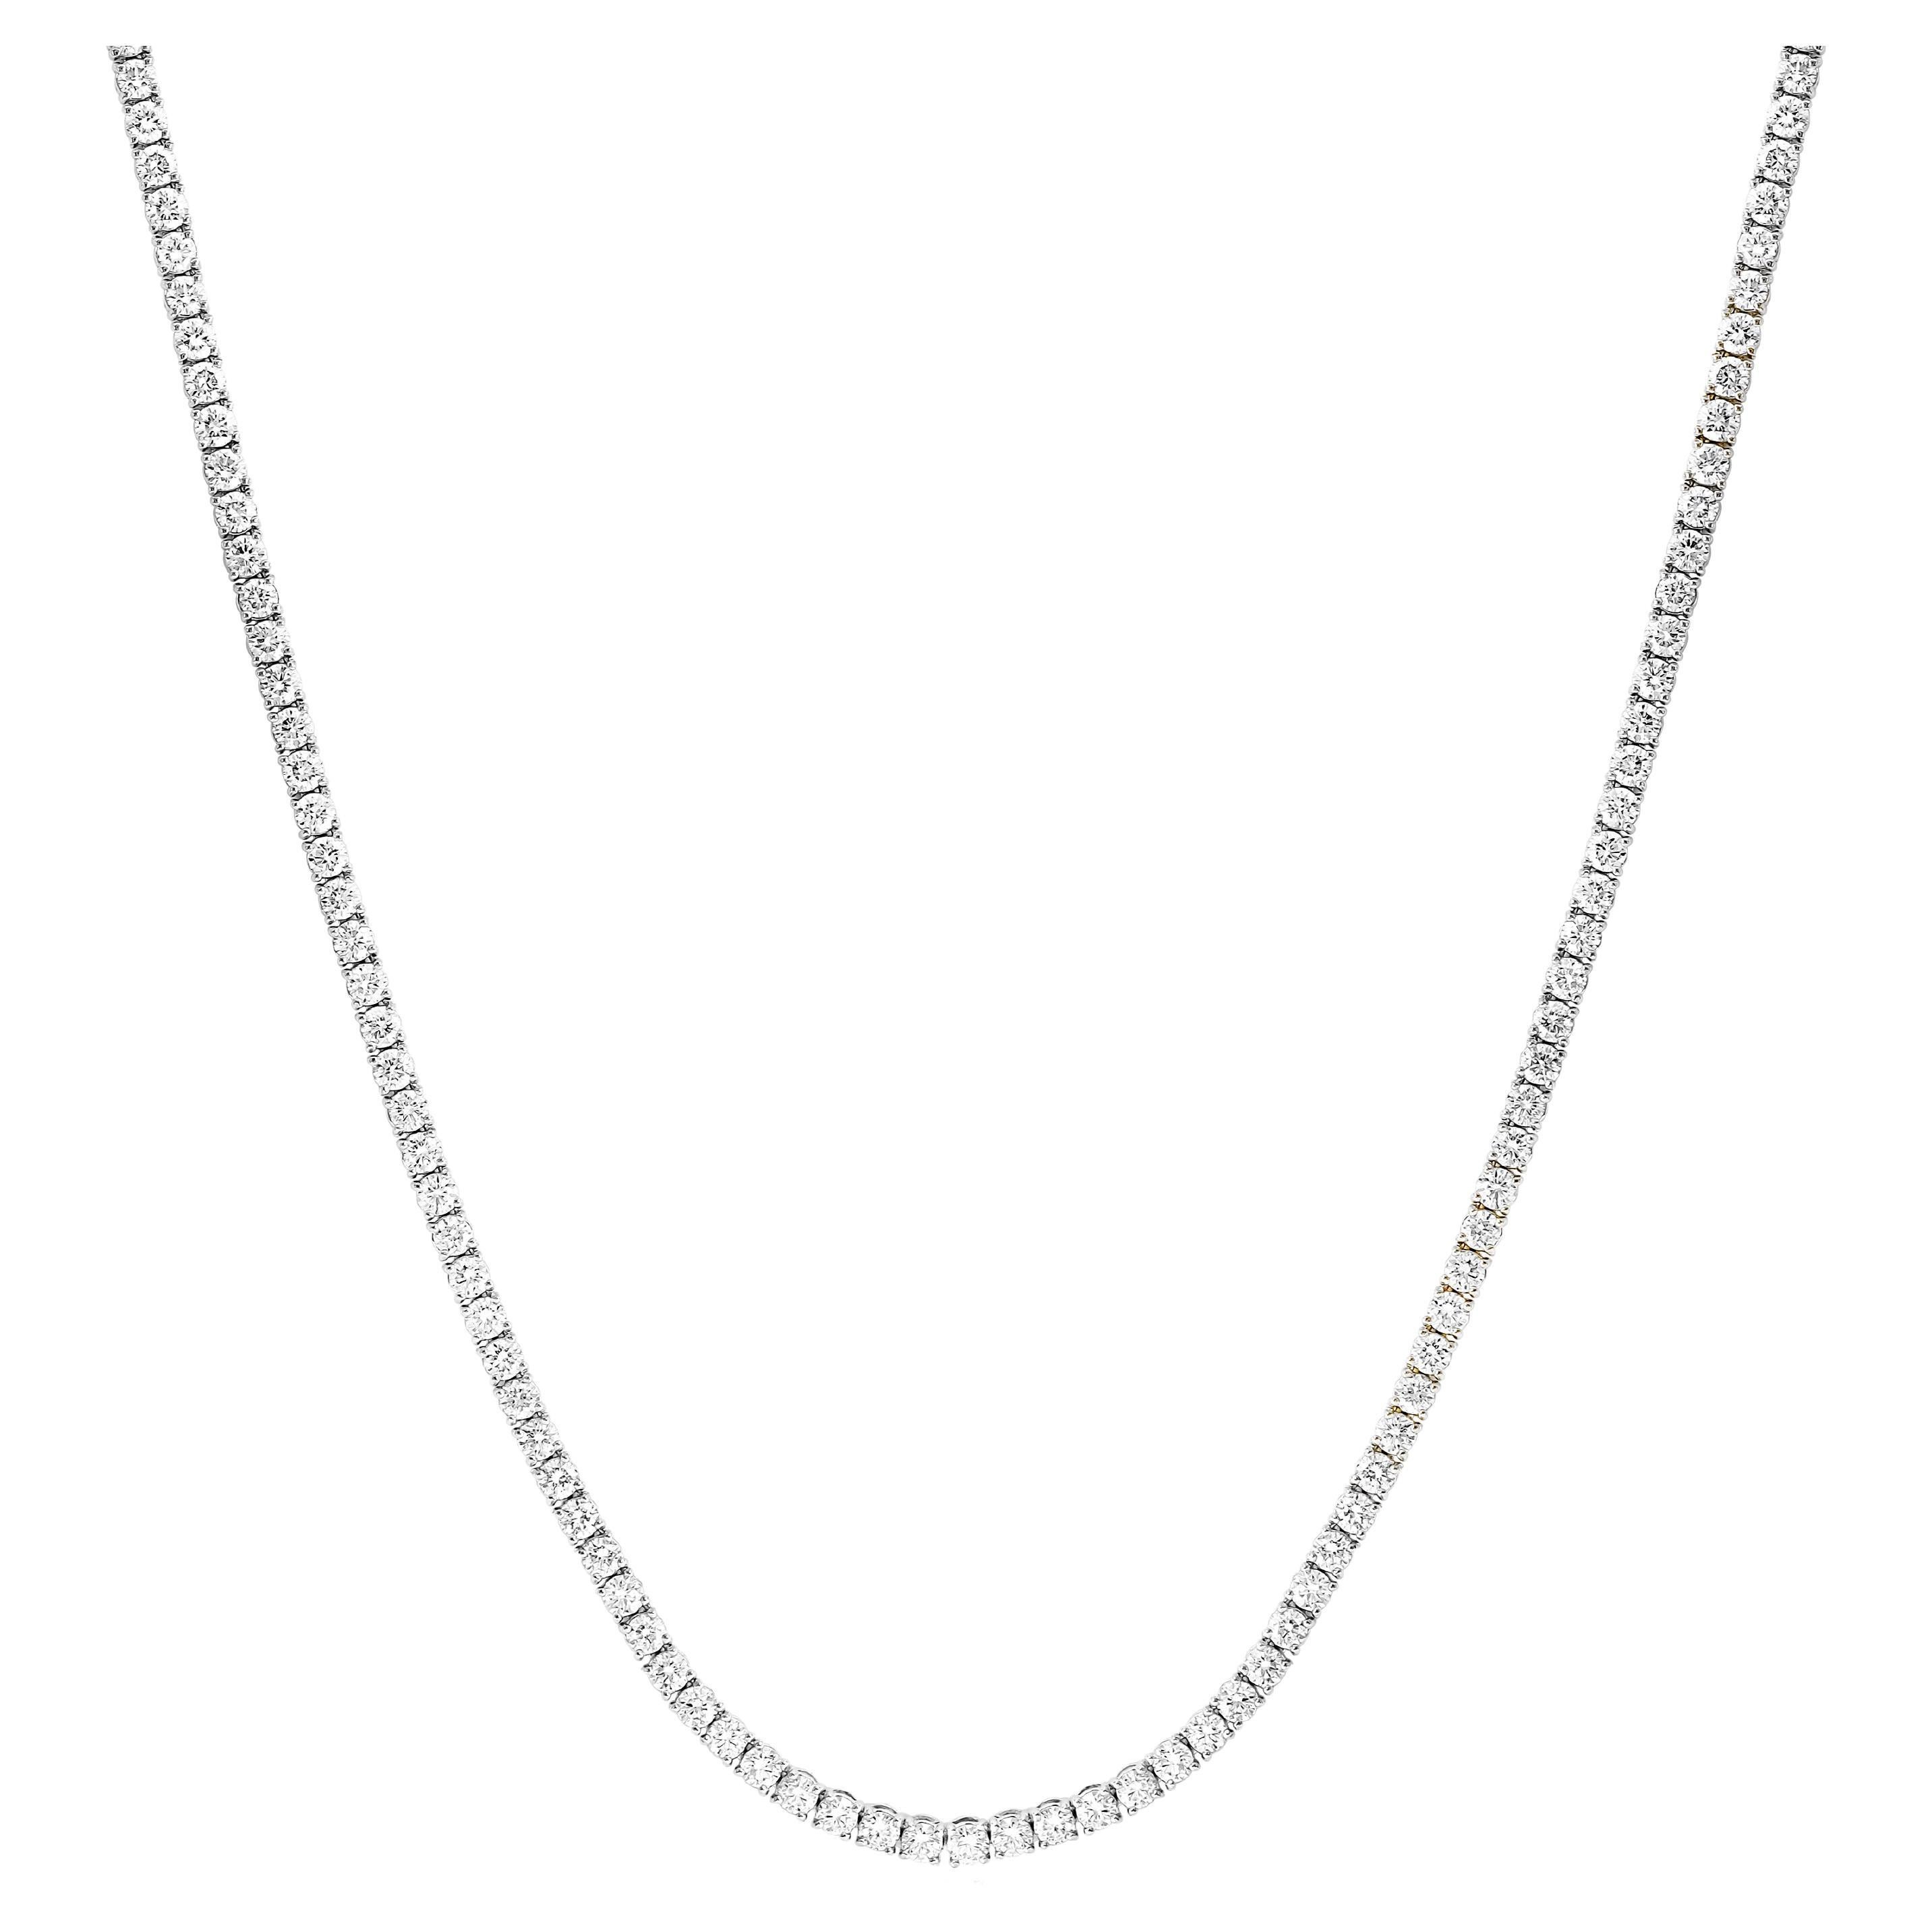 8.01 Carat Diamond Tennis Necklace in 14K White Gold For Sale